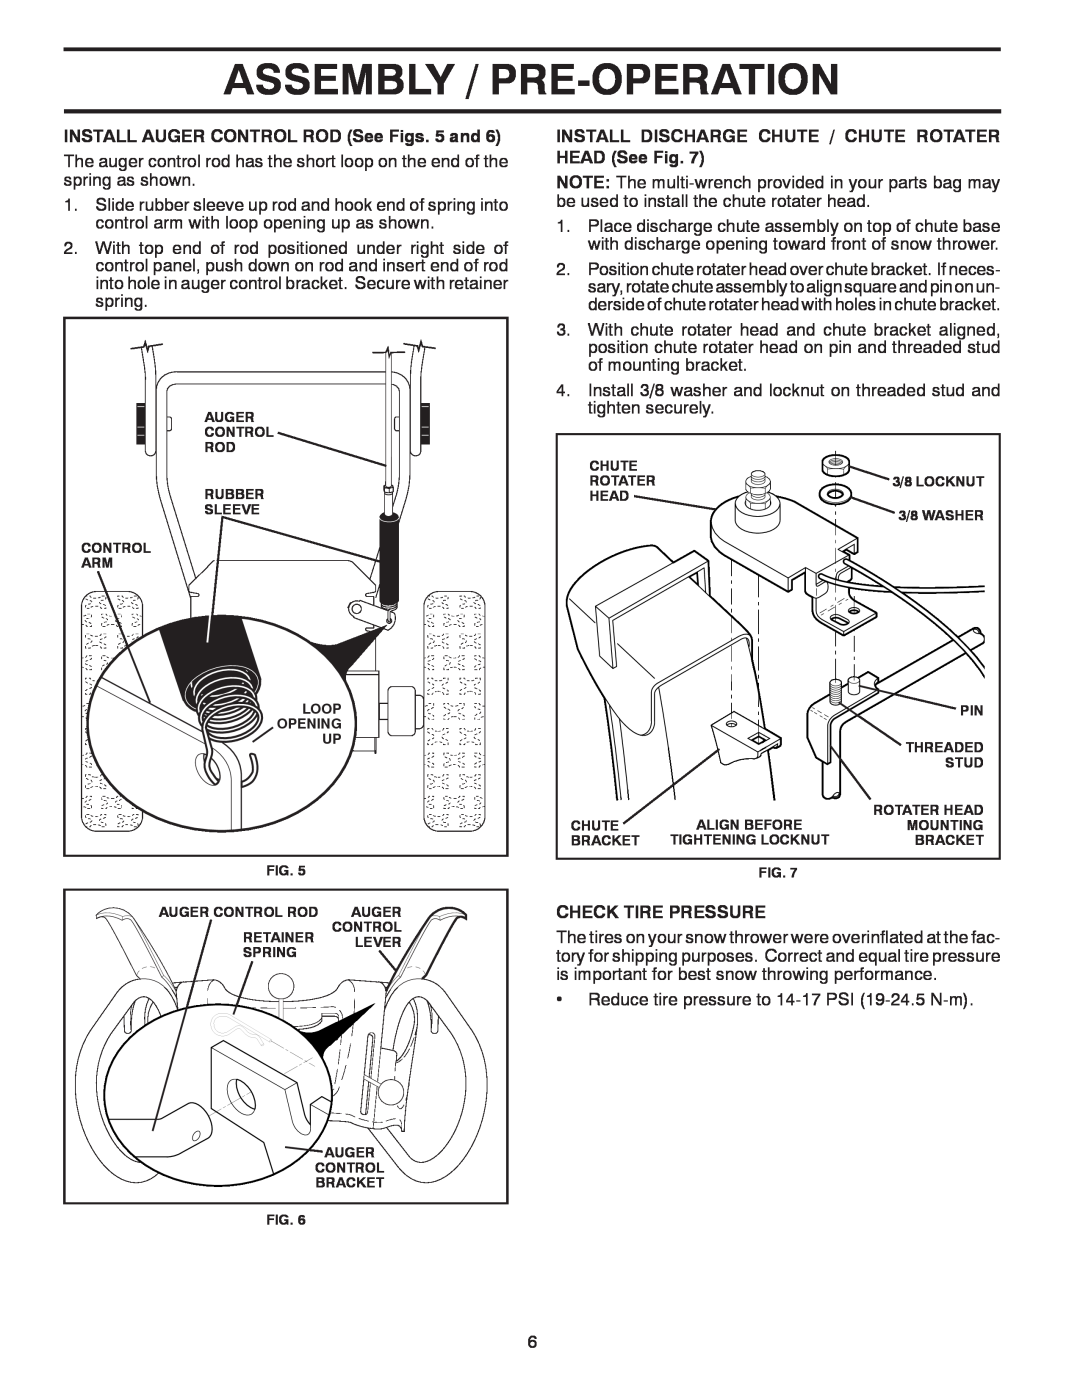 Poulan 96192002301, 422073 Assembly / Pre-Operation, INSTALL AUGER CONTROL ROD See Figs. 5 and, Check Tire Pressure 